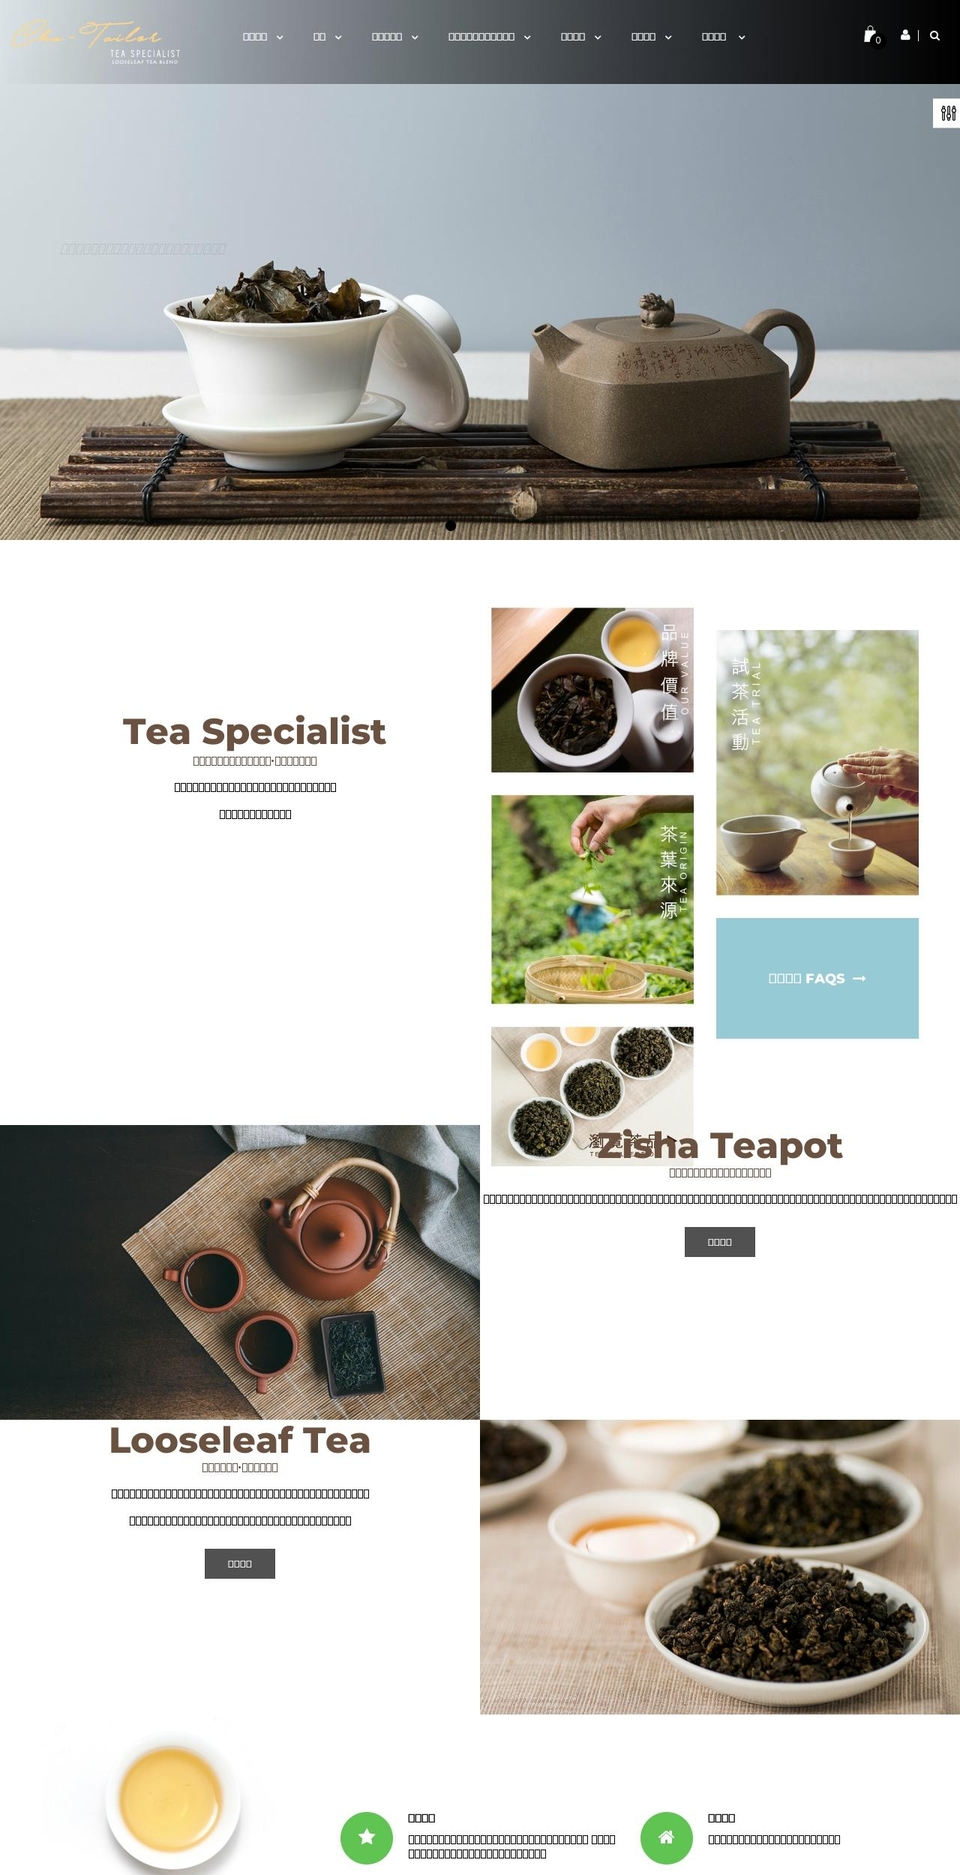 Tailor Shopify theme site example cha-tailor.com